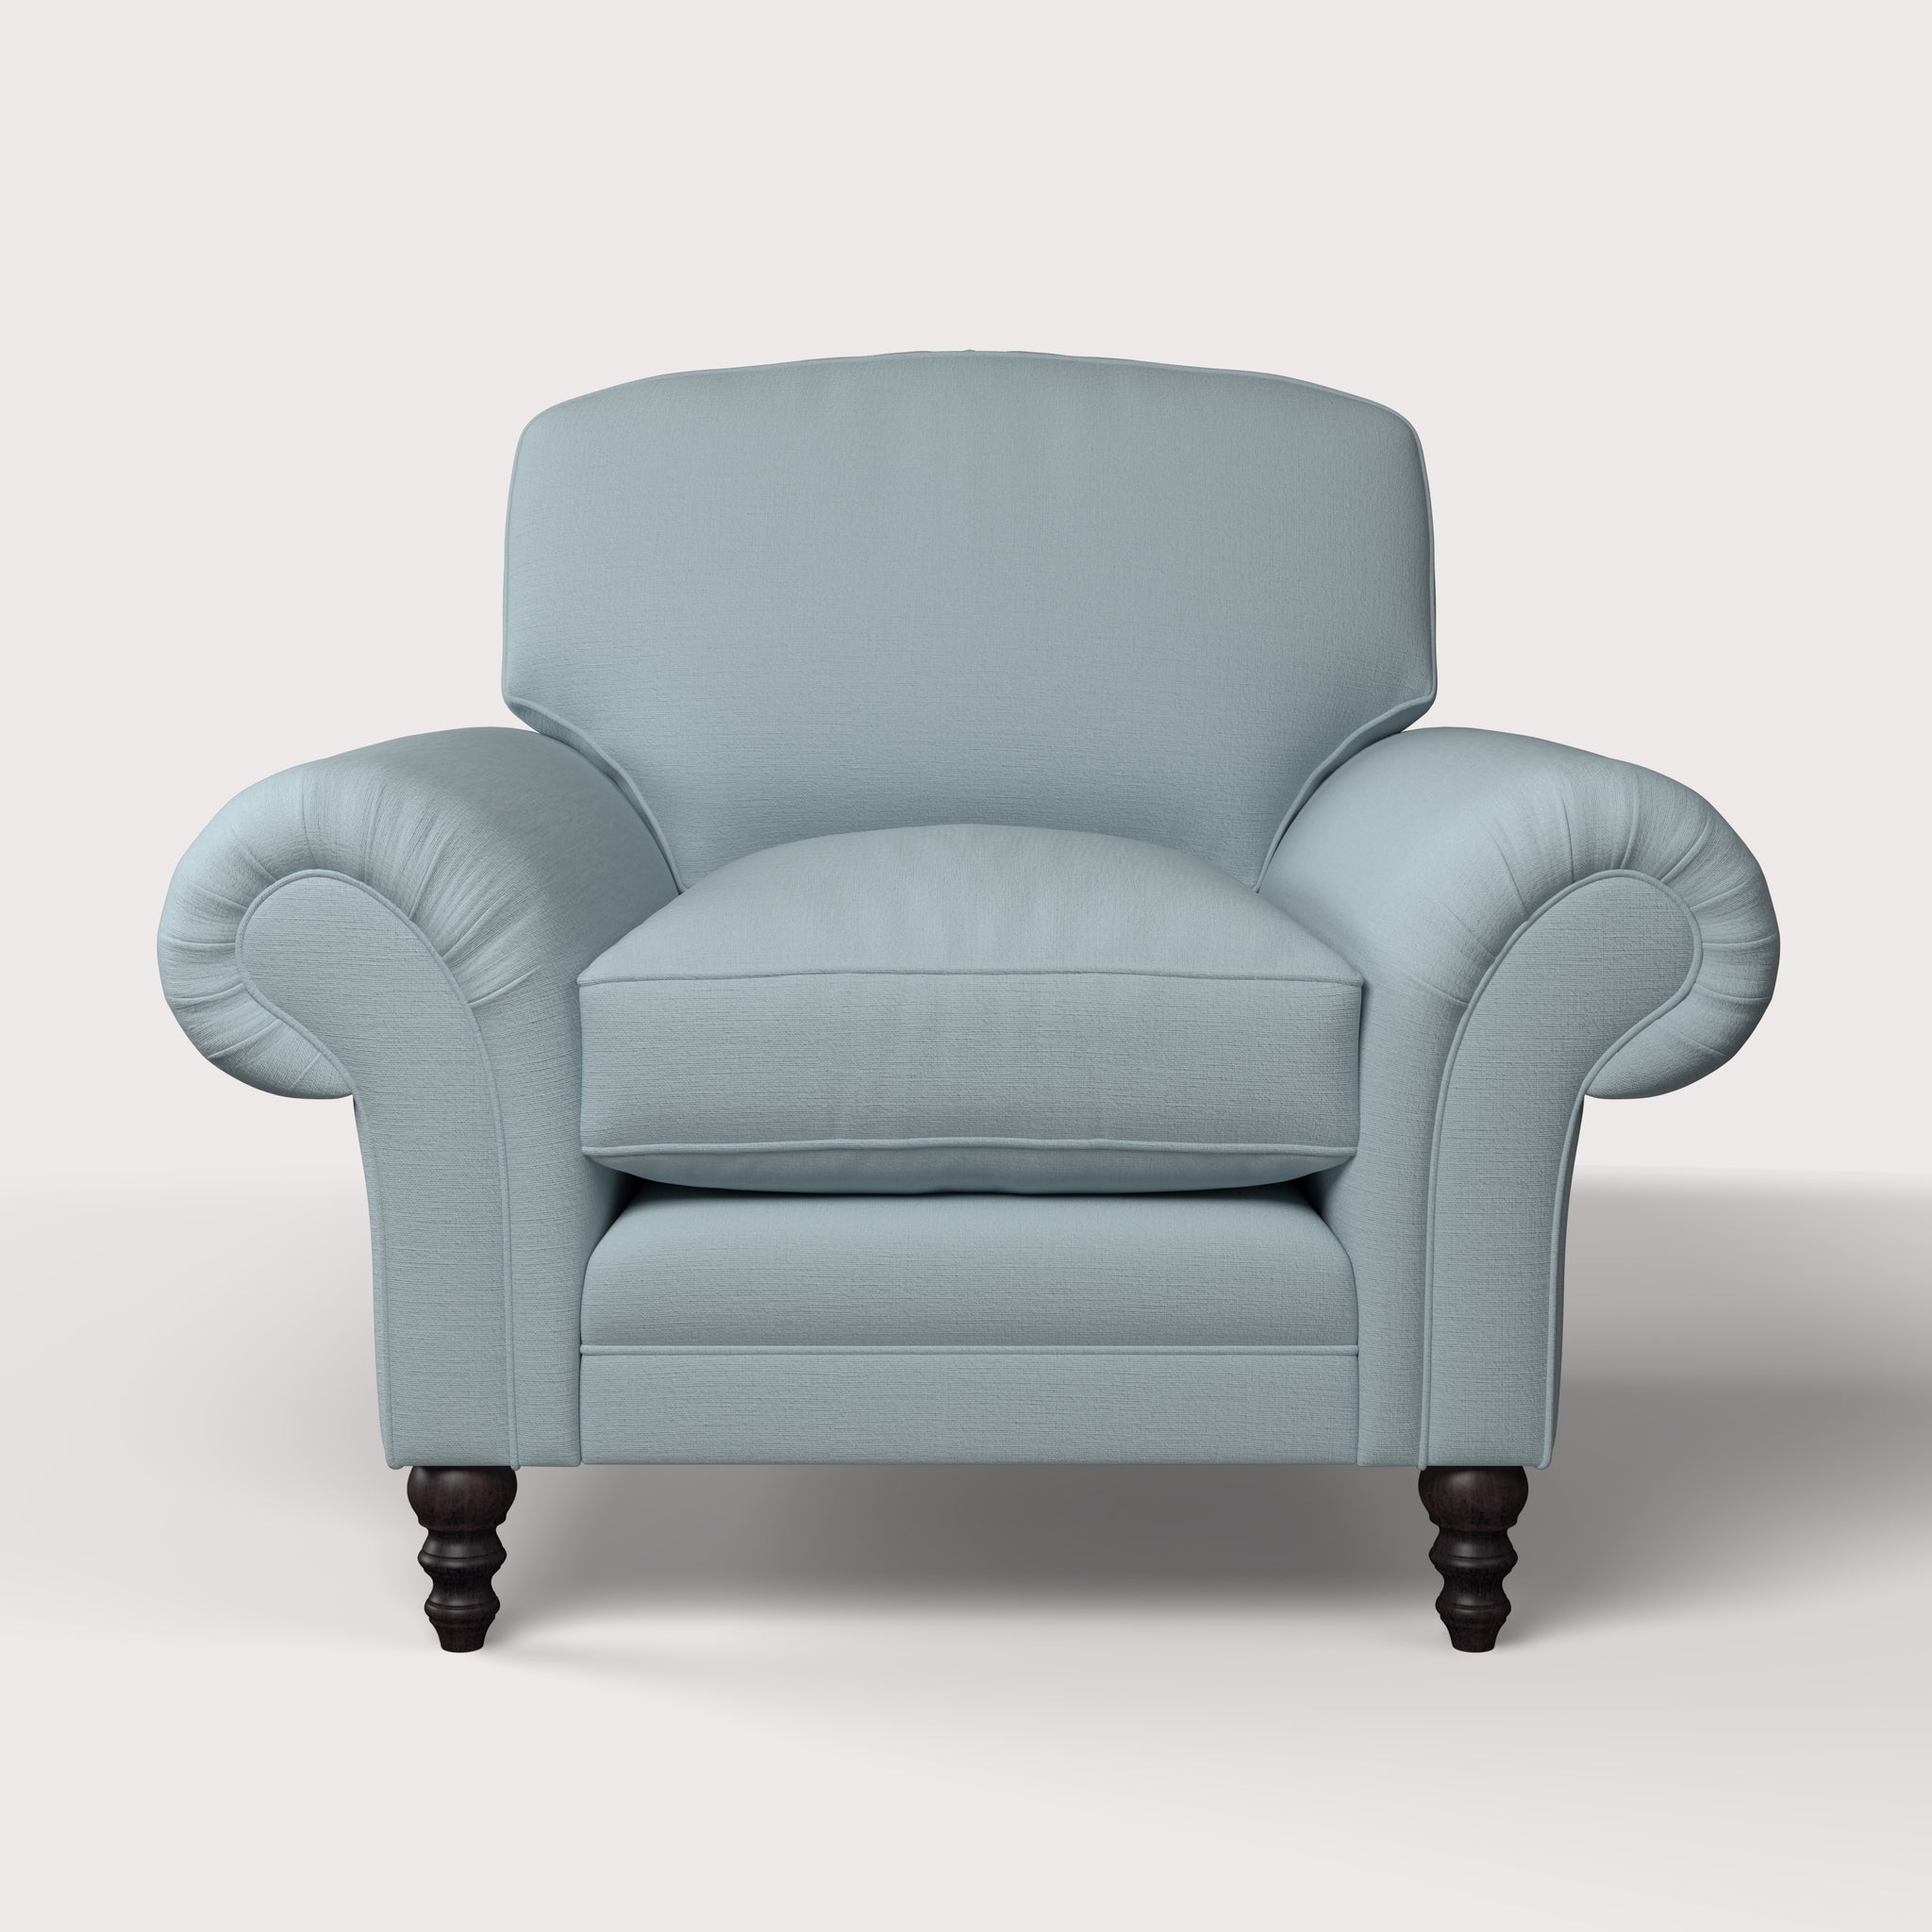 The Moore Armchair